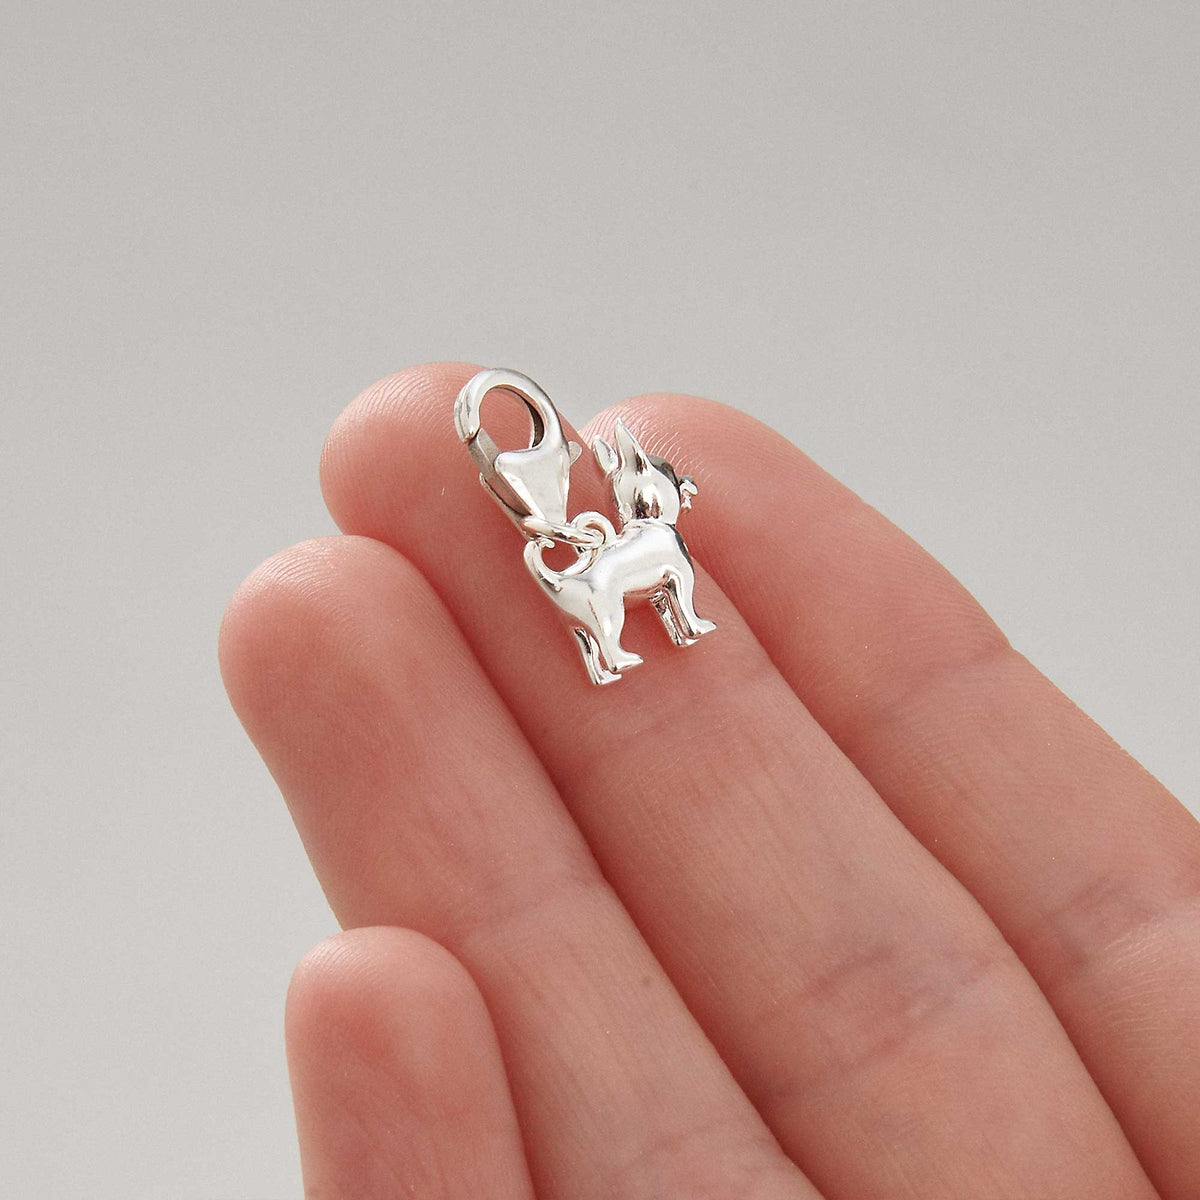 Chihuahua dog breed solid sterling silver dog charm  with clip lobster clasp Scarlett Jewellery Ltd